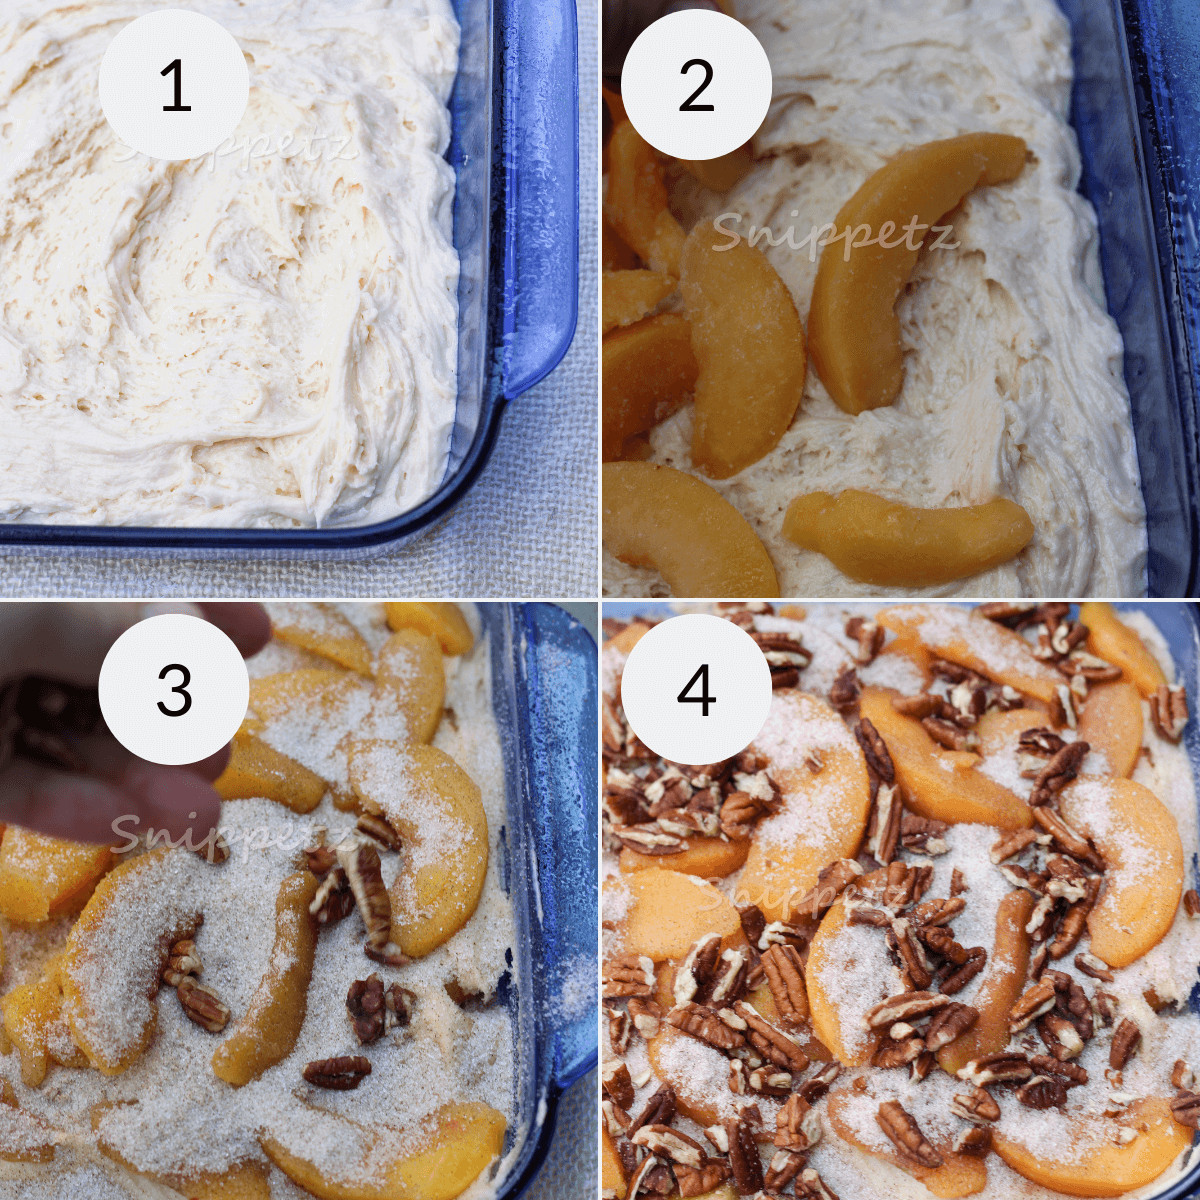 Layering the peach coffee cake. Then baking.